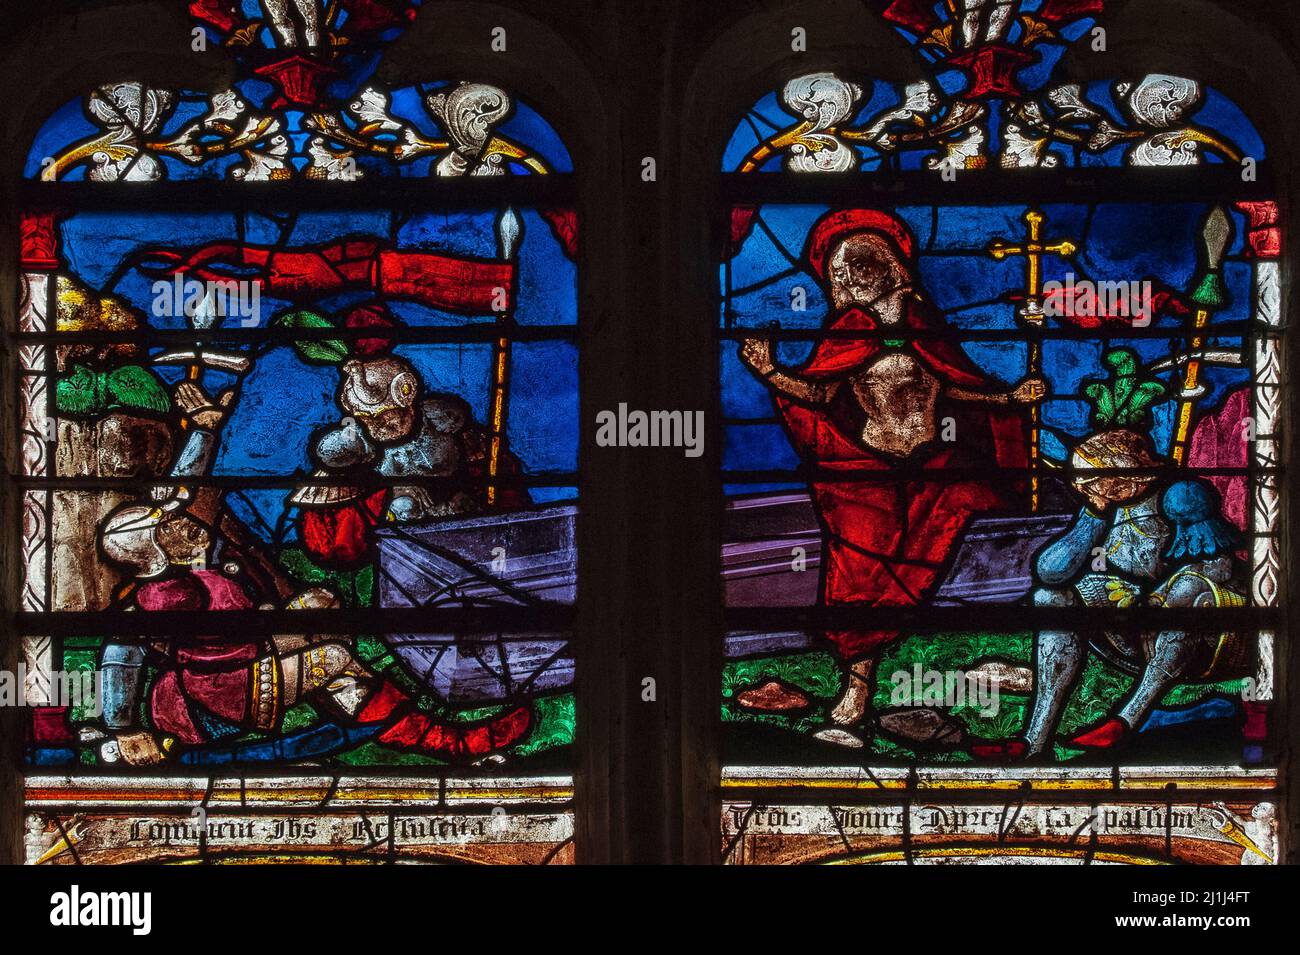 Roman guards reel in shock and disbelief as Jesus steps out of his tomb on the third day after his crucifixion: two panels of colourful Renaissance stained glass in 16th century Resurrection window in the Église Saint-Rémi at Ceffonds, in the Haute-Marne of the Champagne region of northeast France. Stock Photo